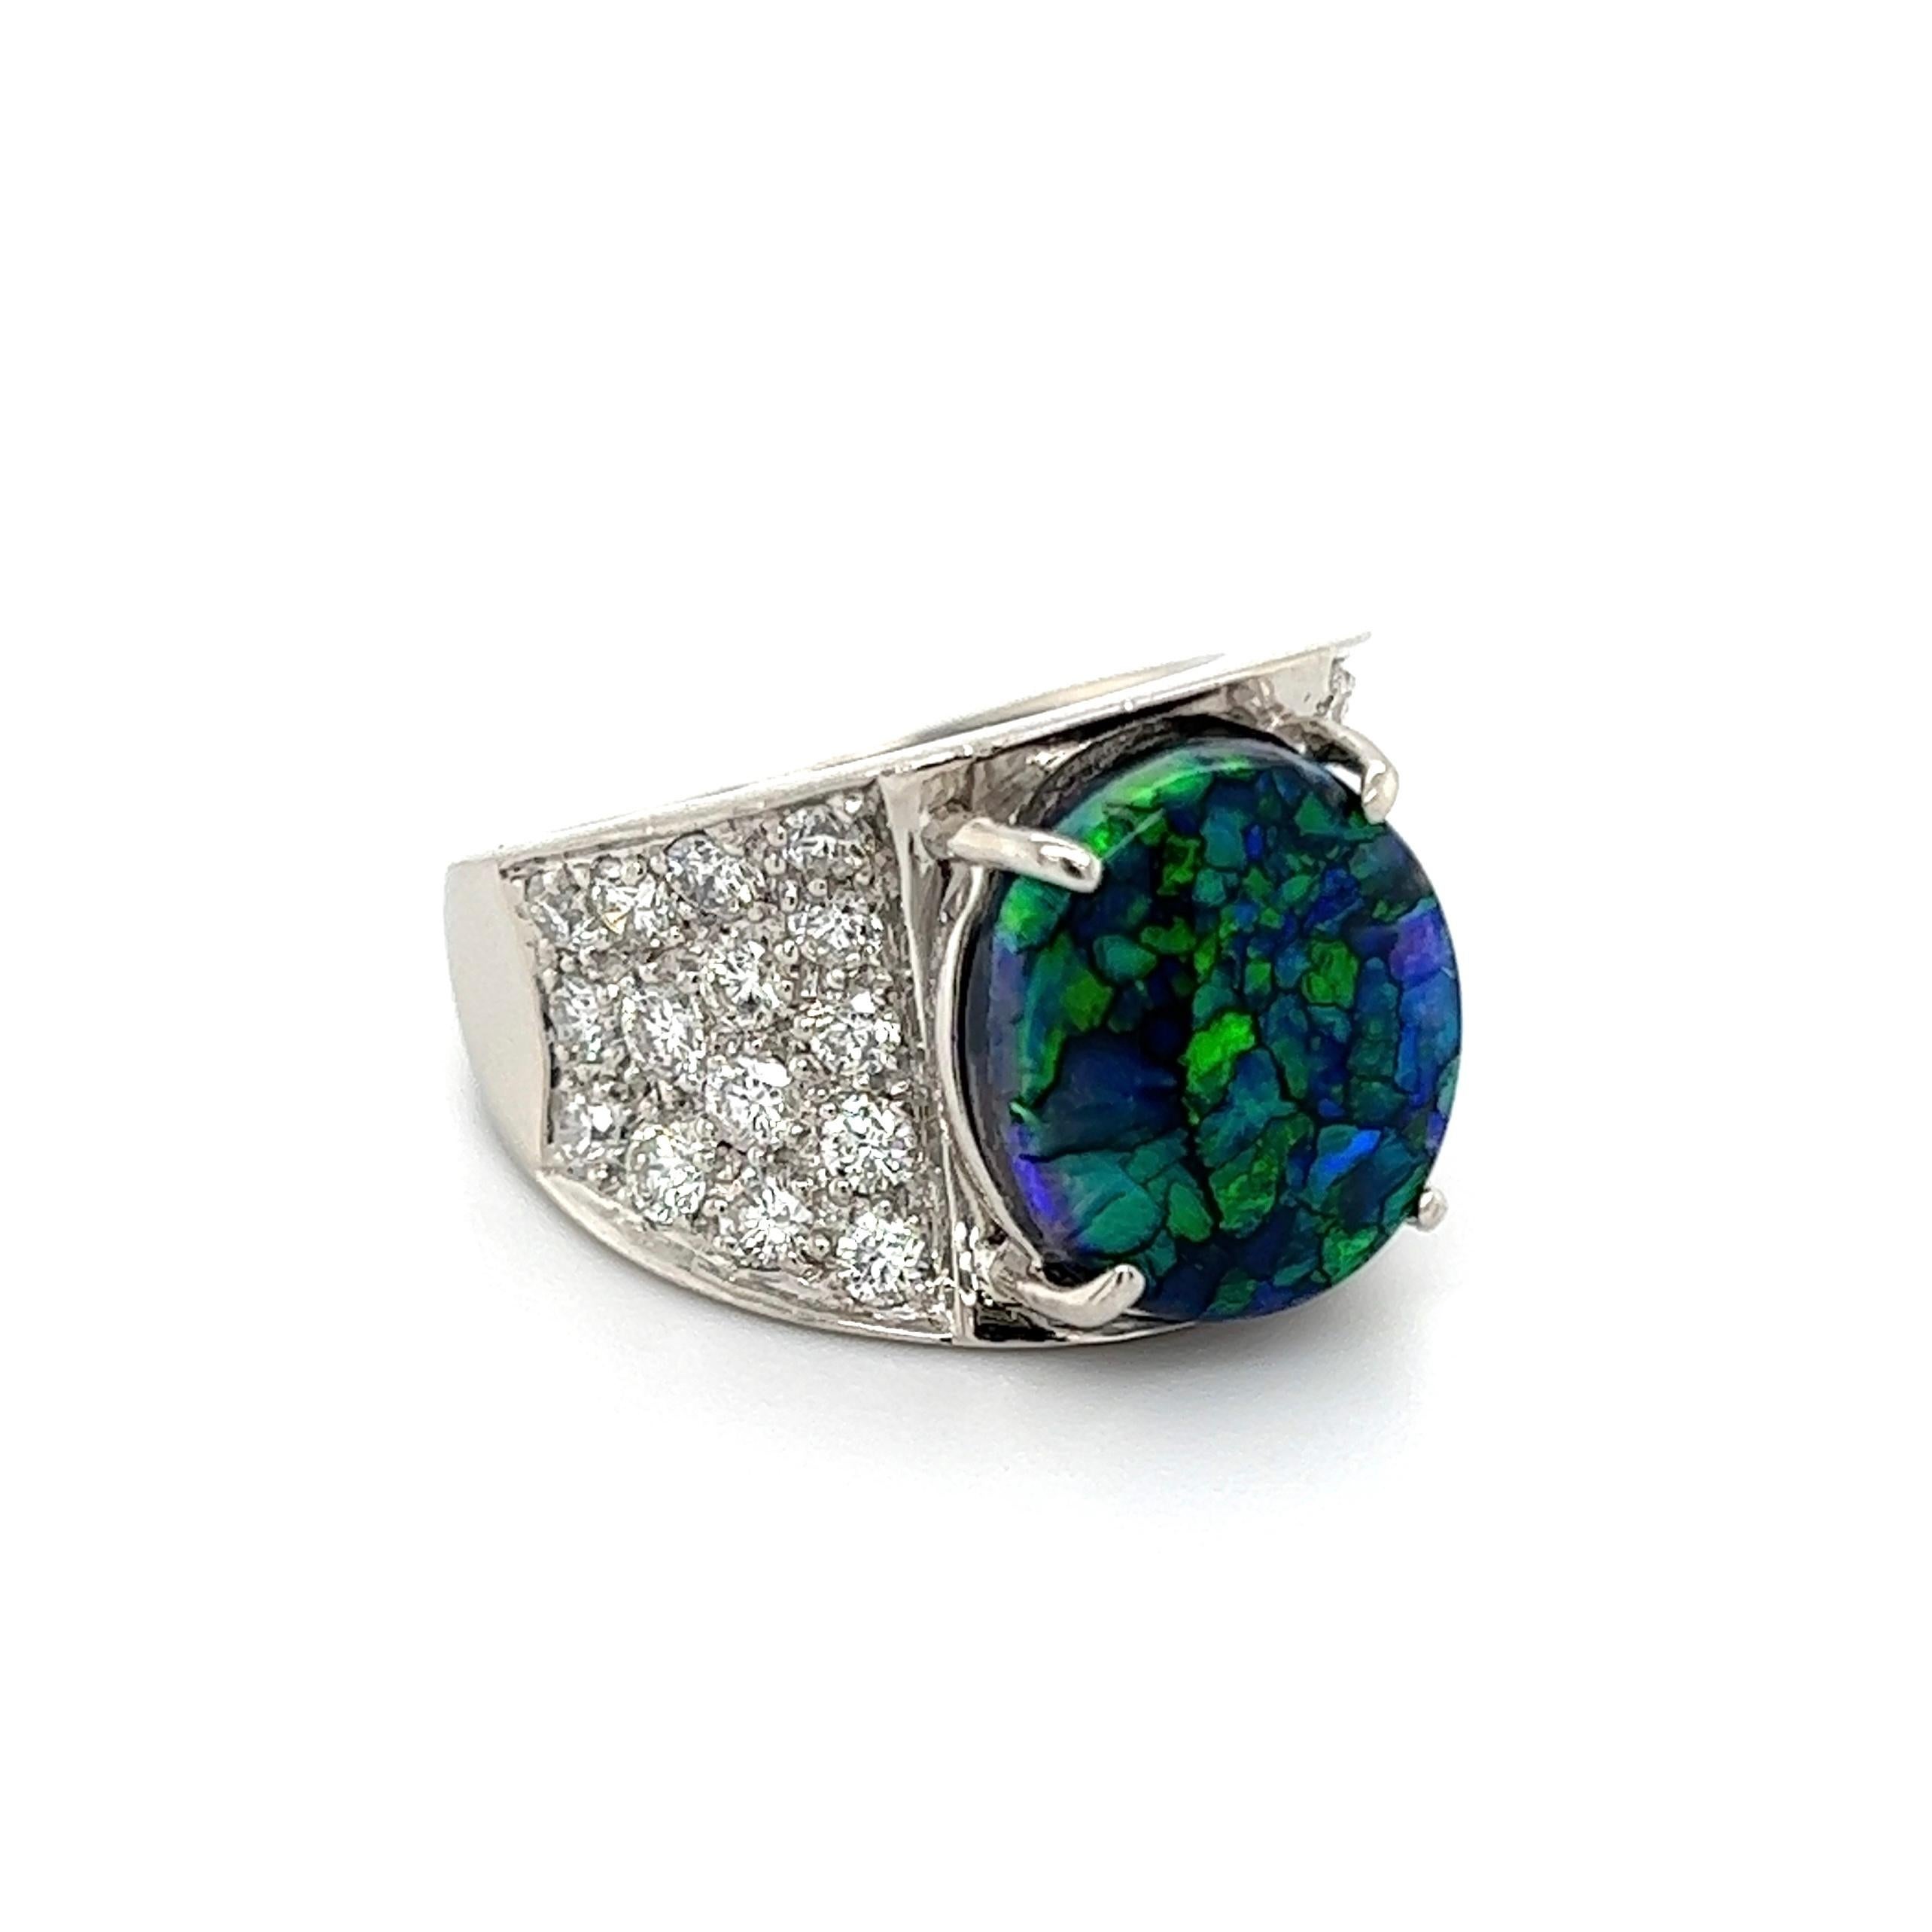 Simply Beautiful! Finely detailed Cocktail Ring, center securely nestled with a Black Harlequin Opal weighing 3.48 Carats, encrusted either side with Hand set Diamonds, approx. 1.33 total carat weight. Hand crafted Platinum mounting. Approx.